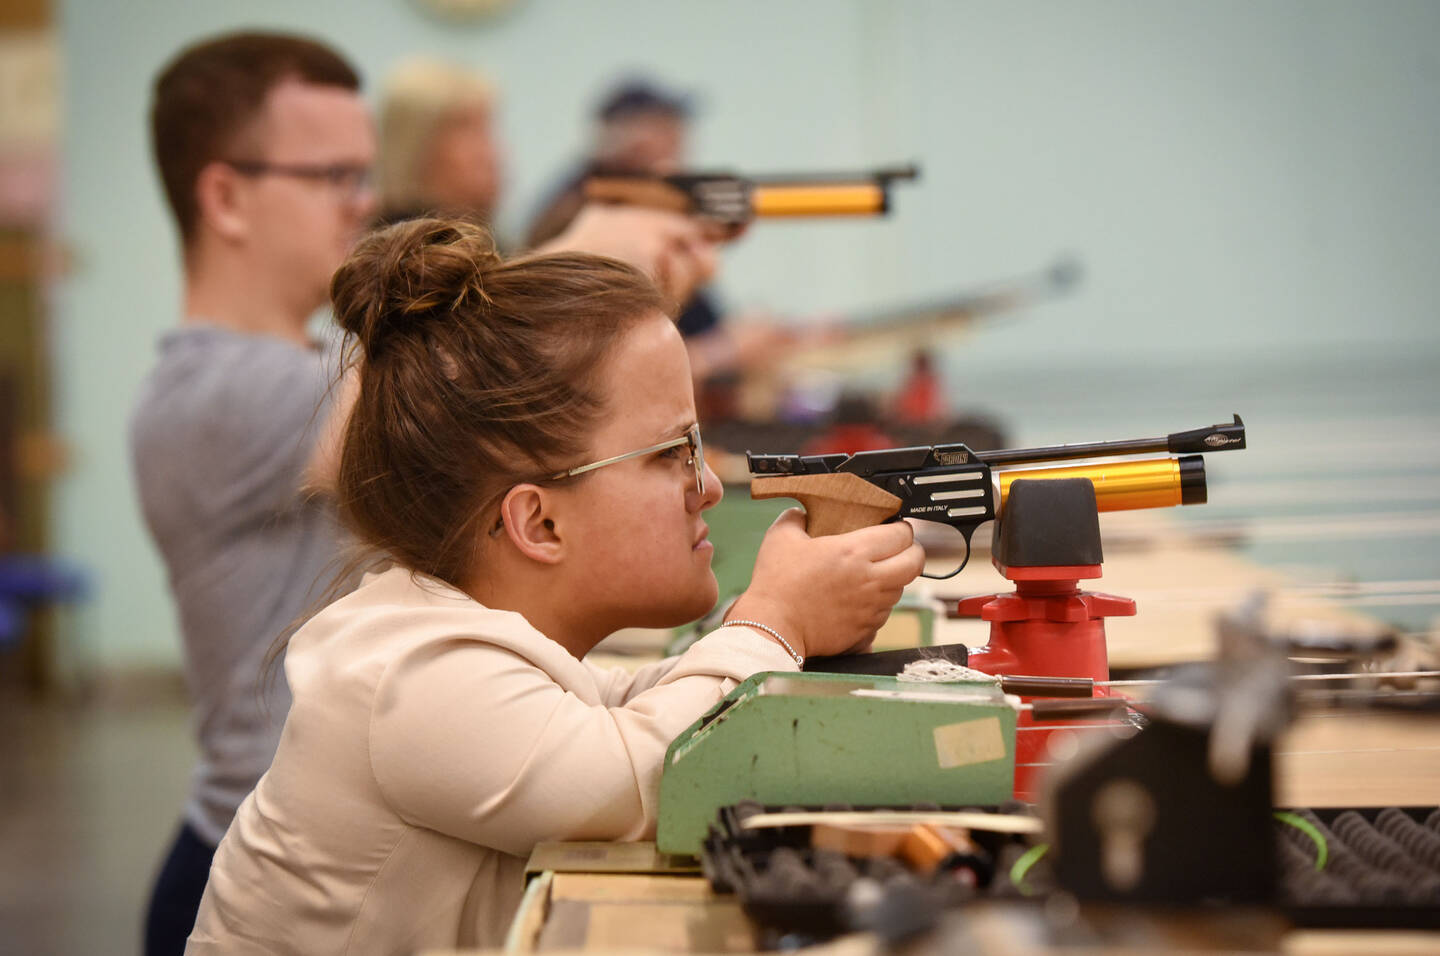 Woman with dwarfism taking part in air target shooting activity